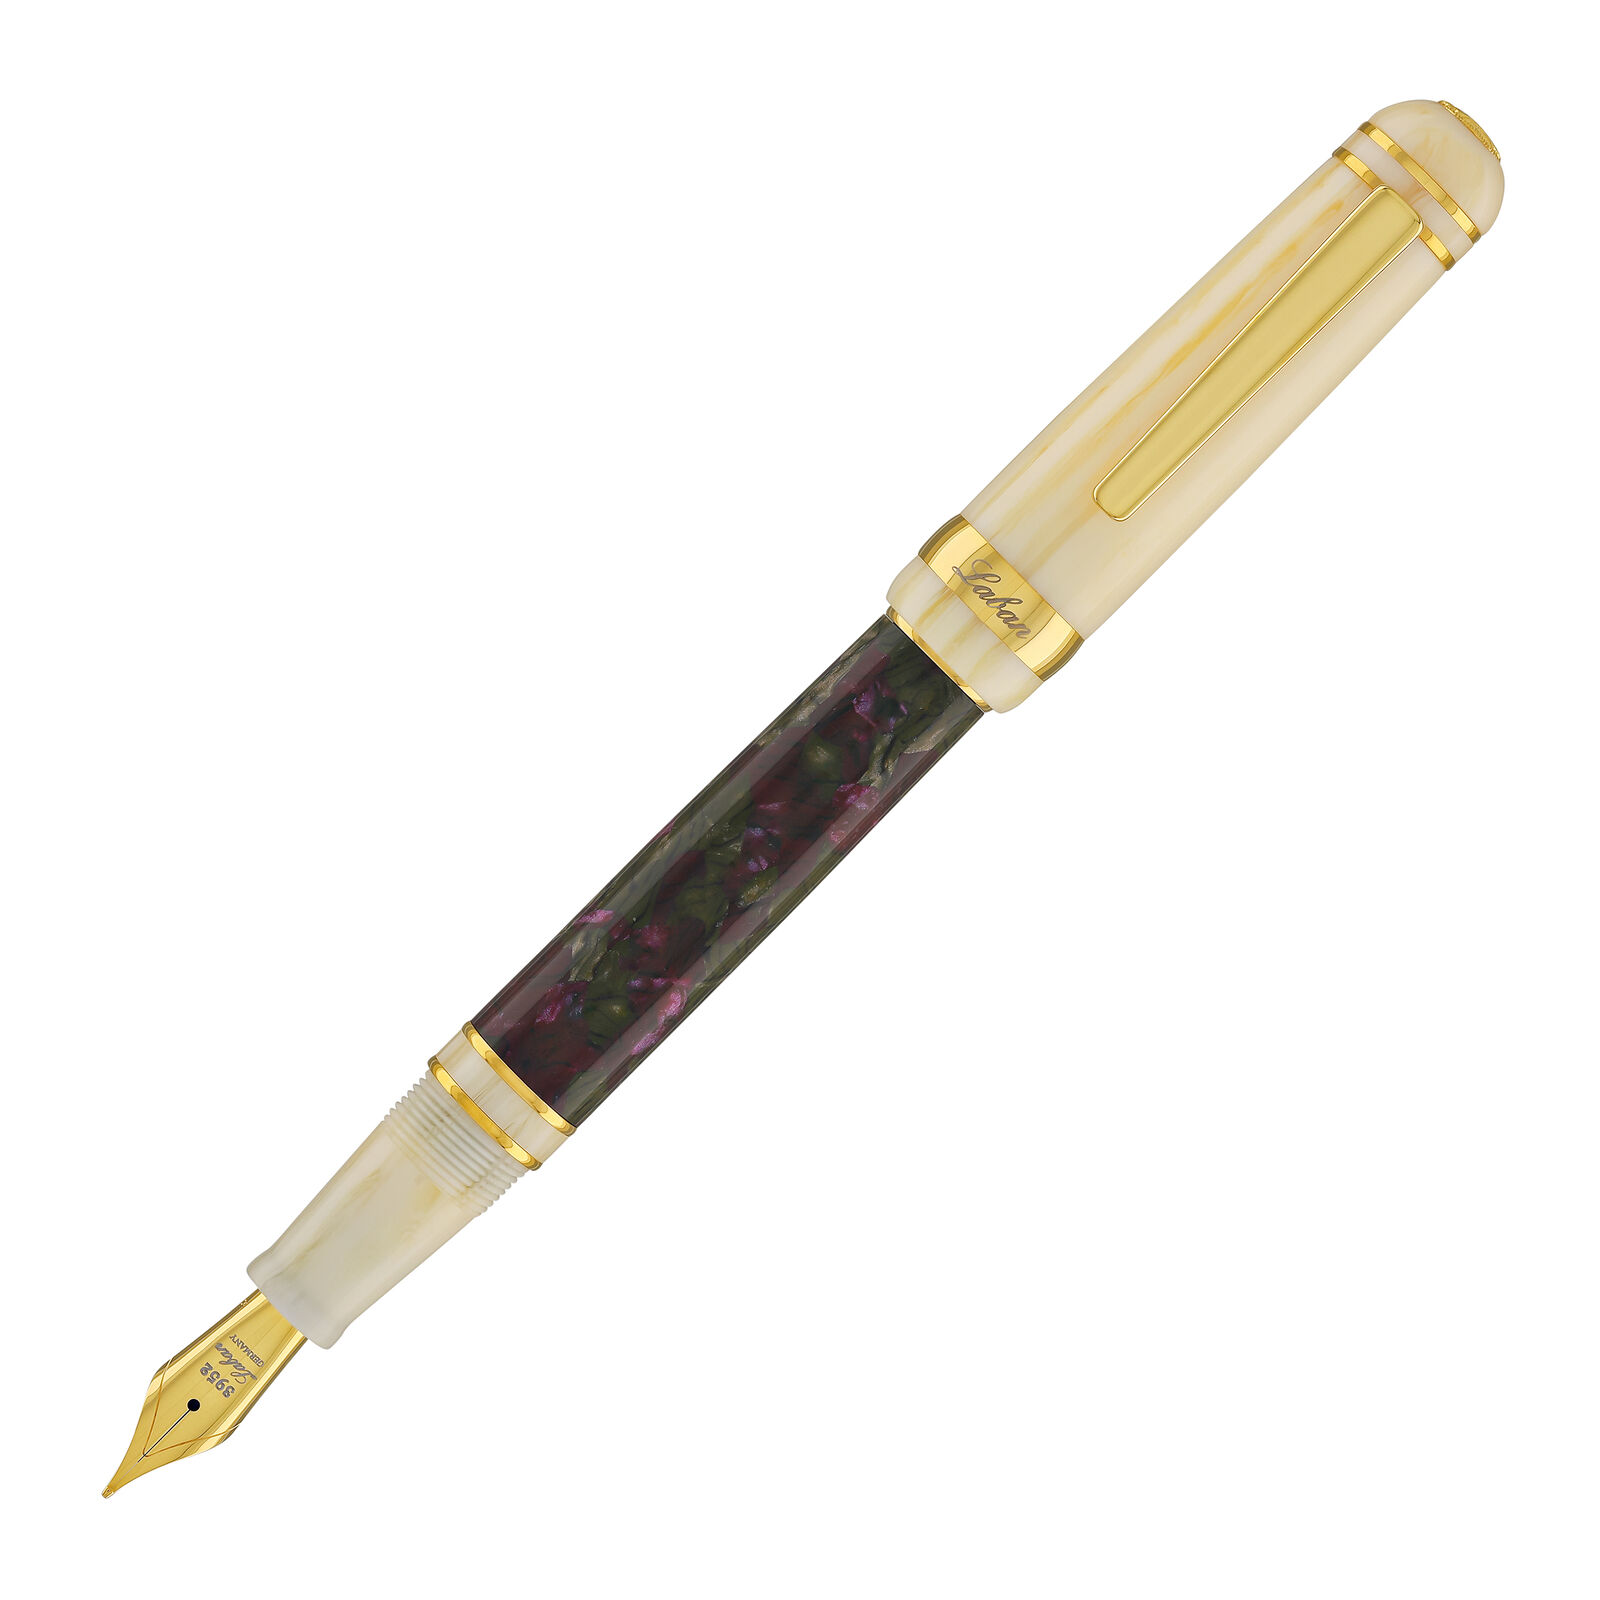 Laban 325 Fountain Pen in Damask - Fine Point - NEW in Box